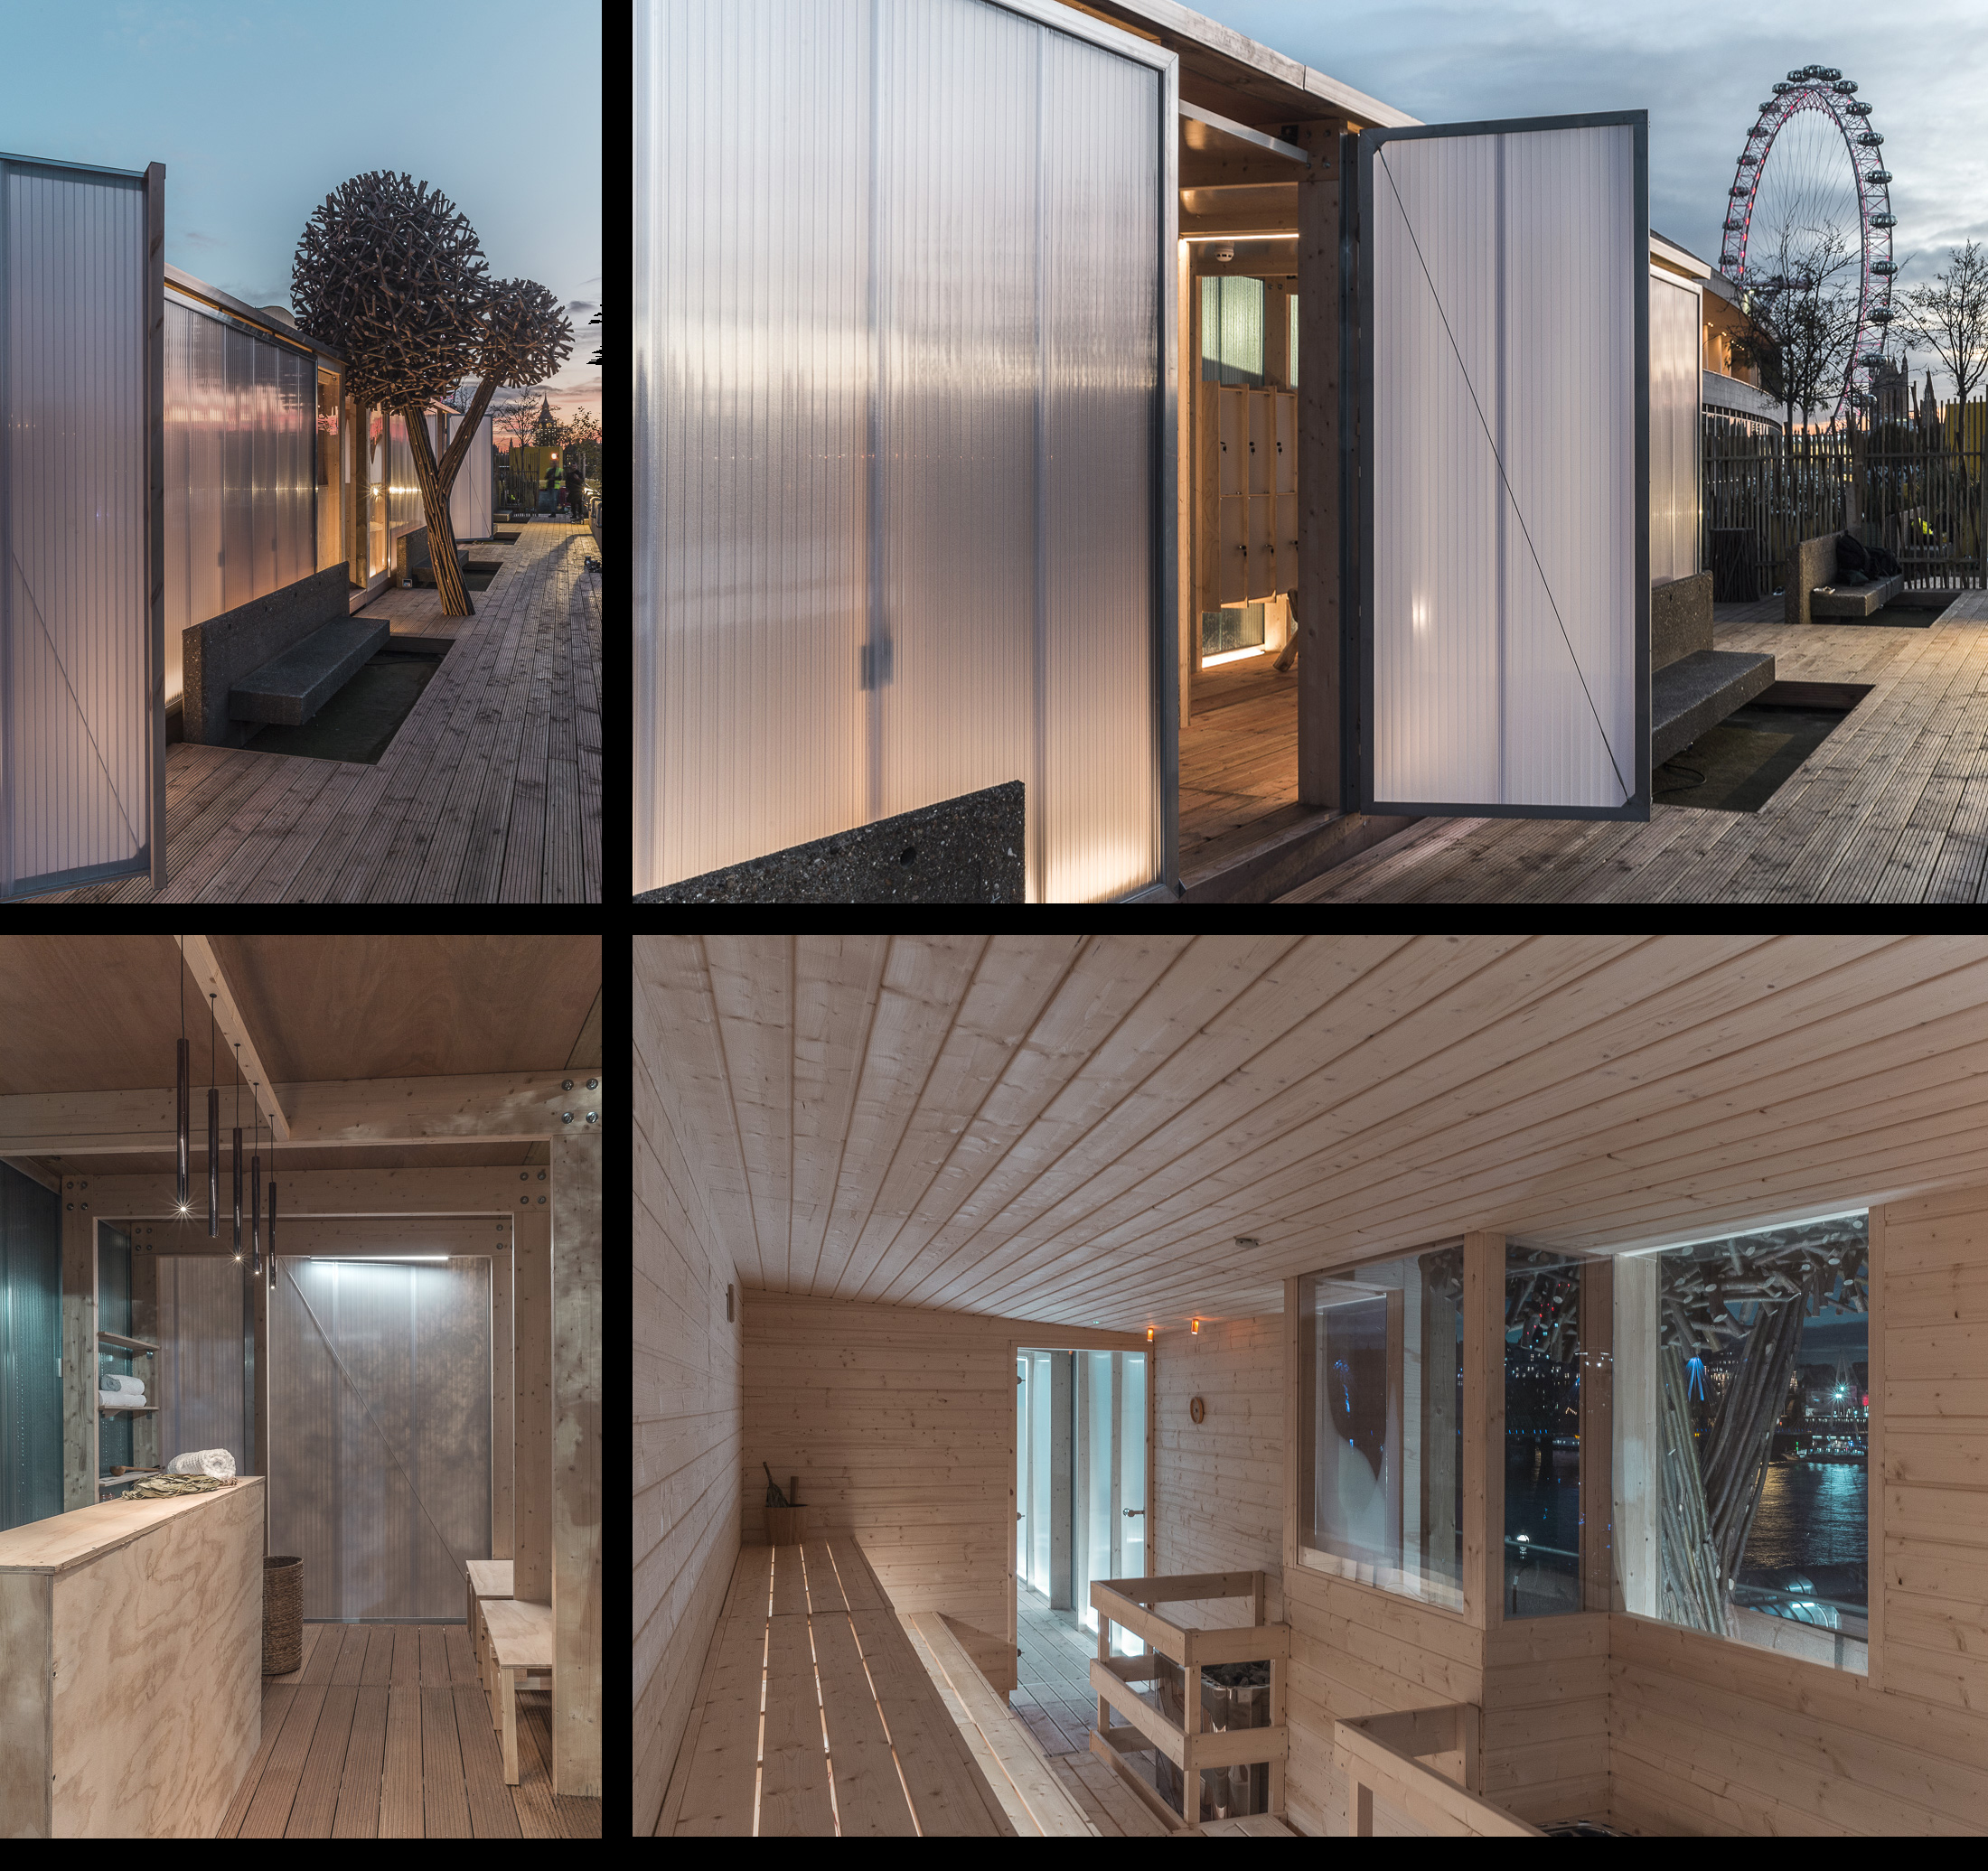 Archinfo | Finnish rooftop sauna open in the heart of London